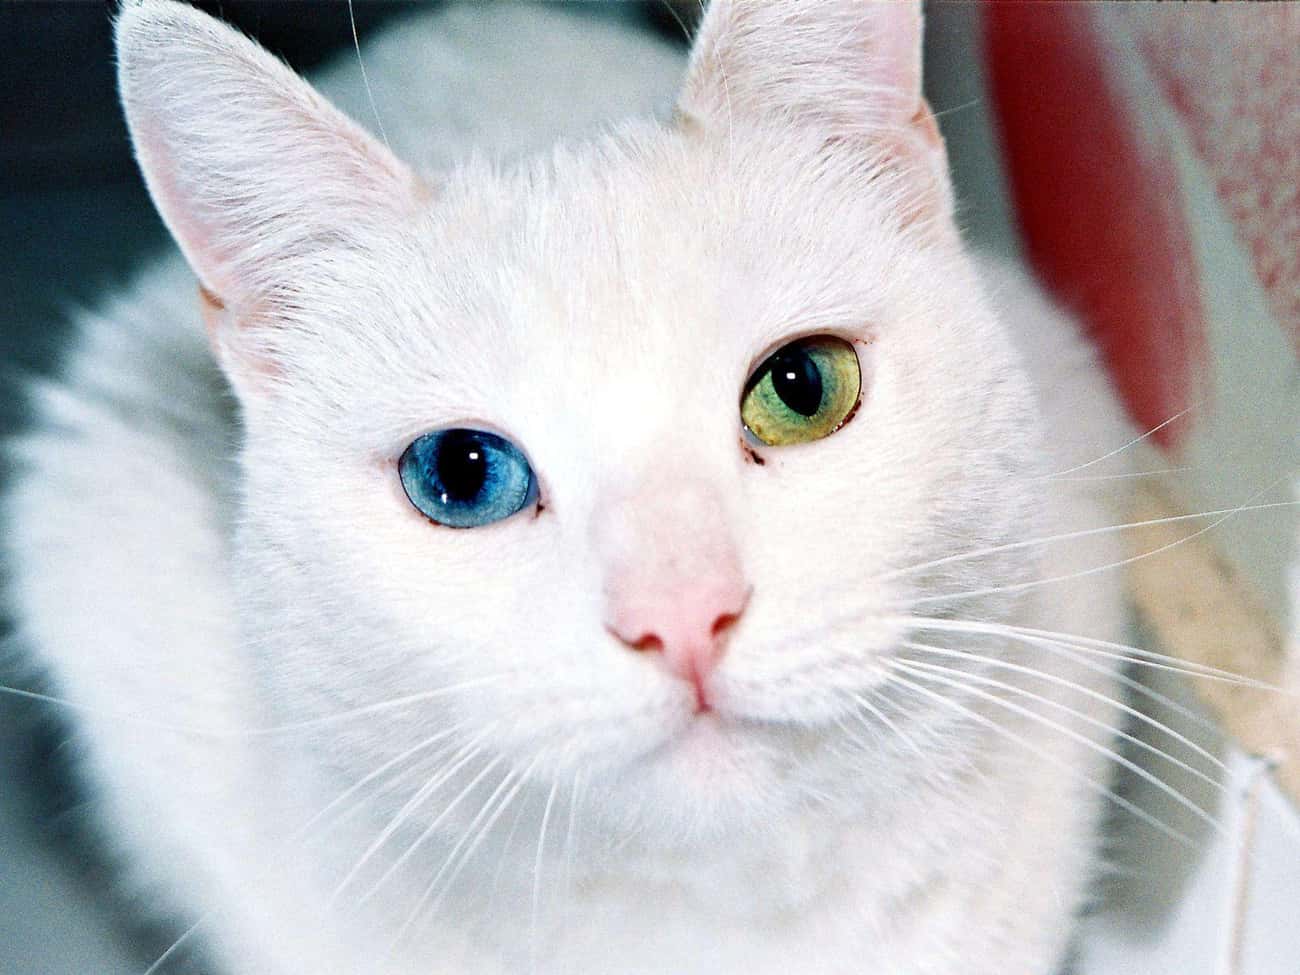 This Cat Has Such Warm Eyes